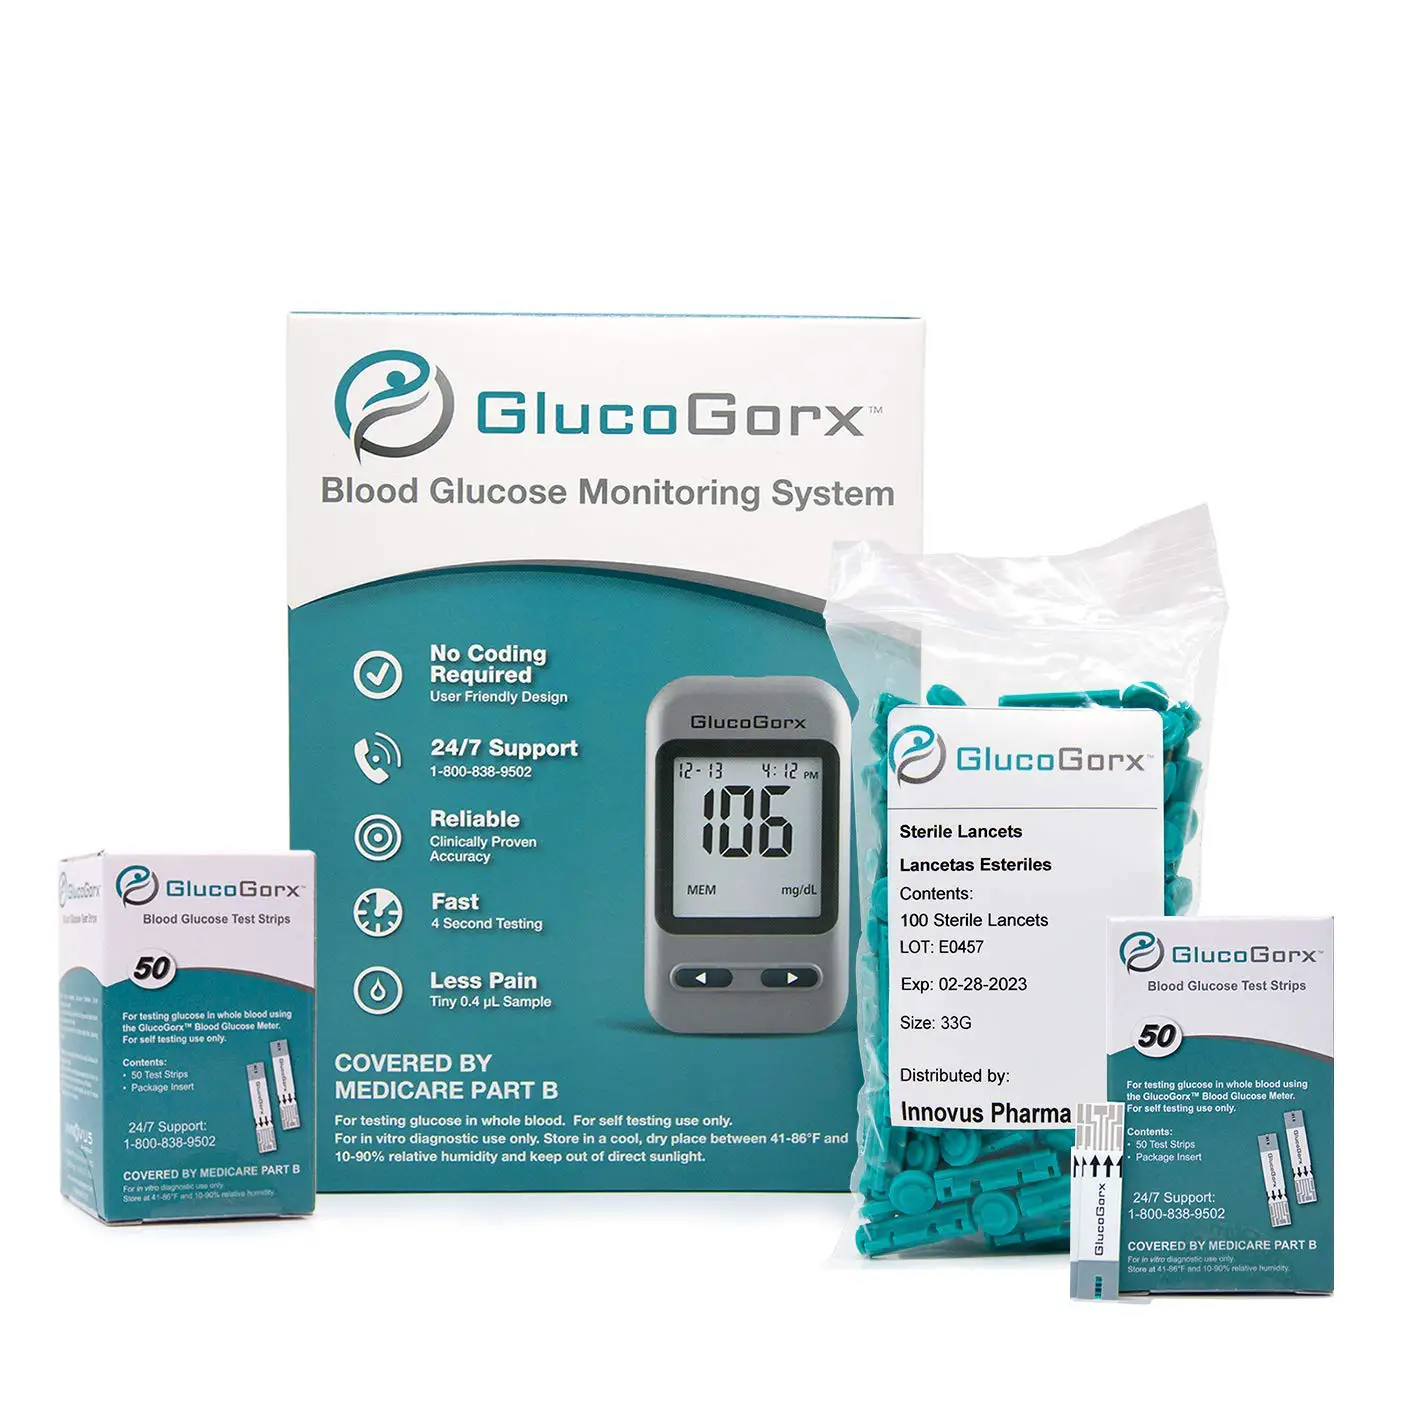 Are Blood Glucose Test Strips Covered By Medicare